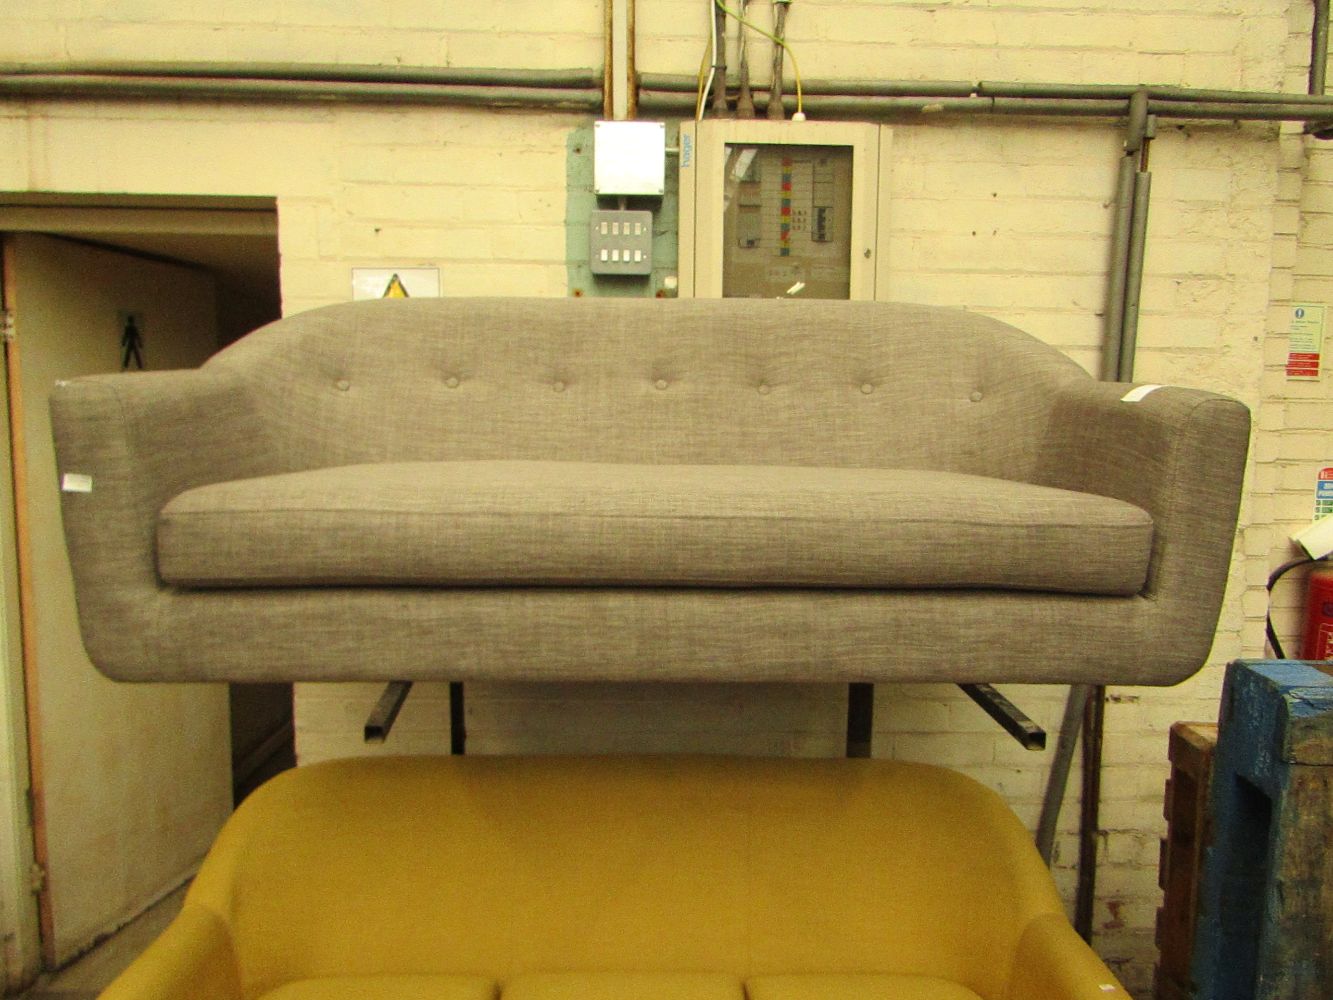 New Delivery of Furniture and Sofas From Swoon, Made.com and Cox and Cox